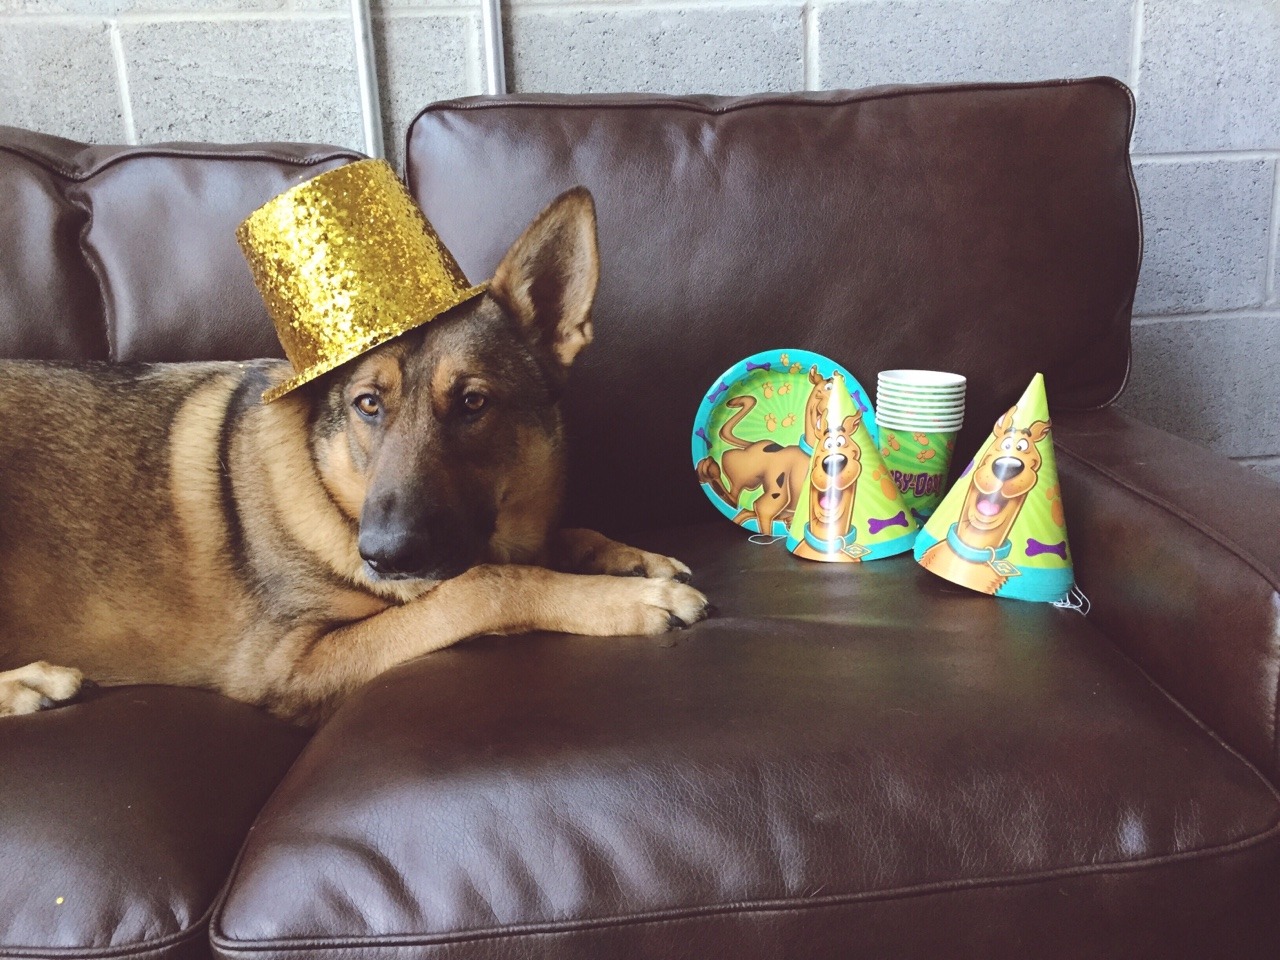 Scooby Doo themed birthday party for his third birthday today!